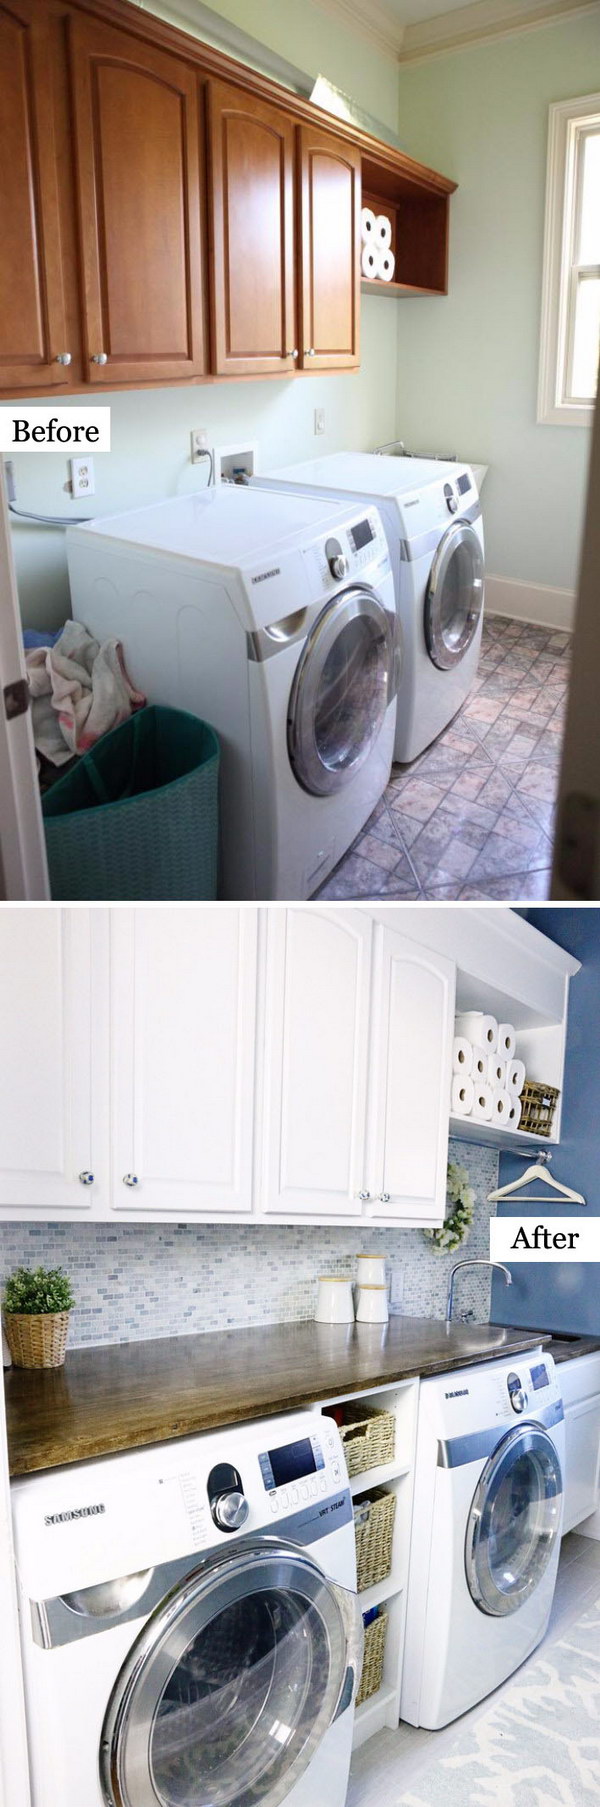 Laundry Room Makeover from Boring to Beautiful and Functional. 